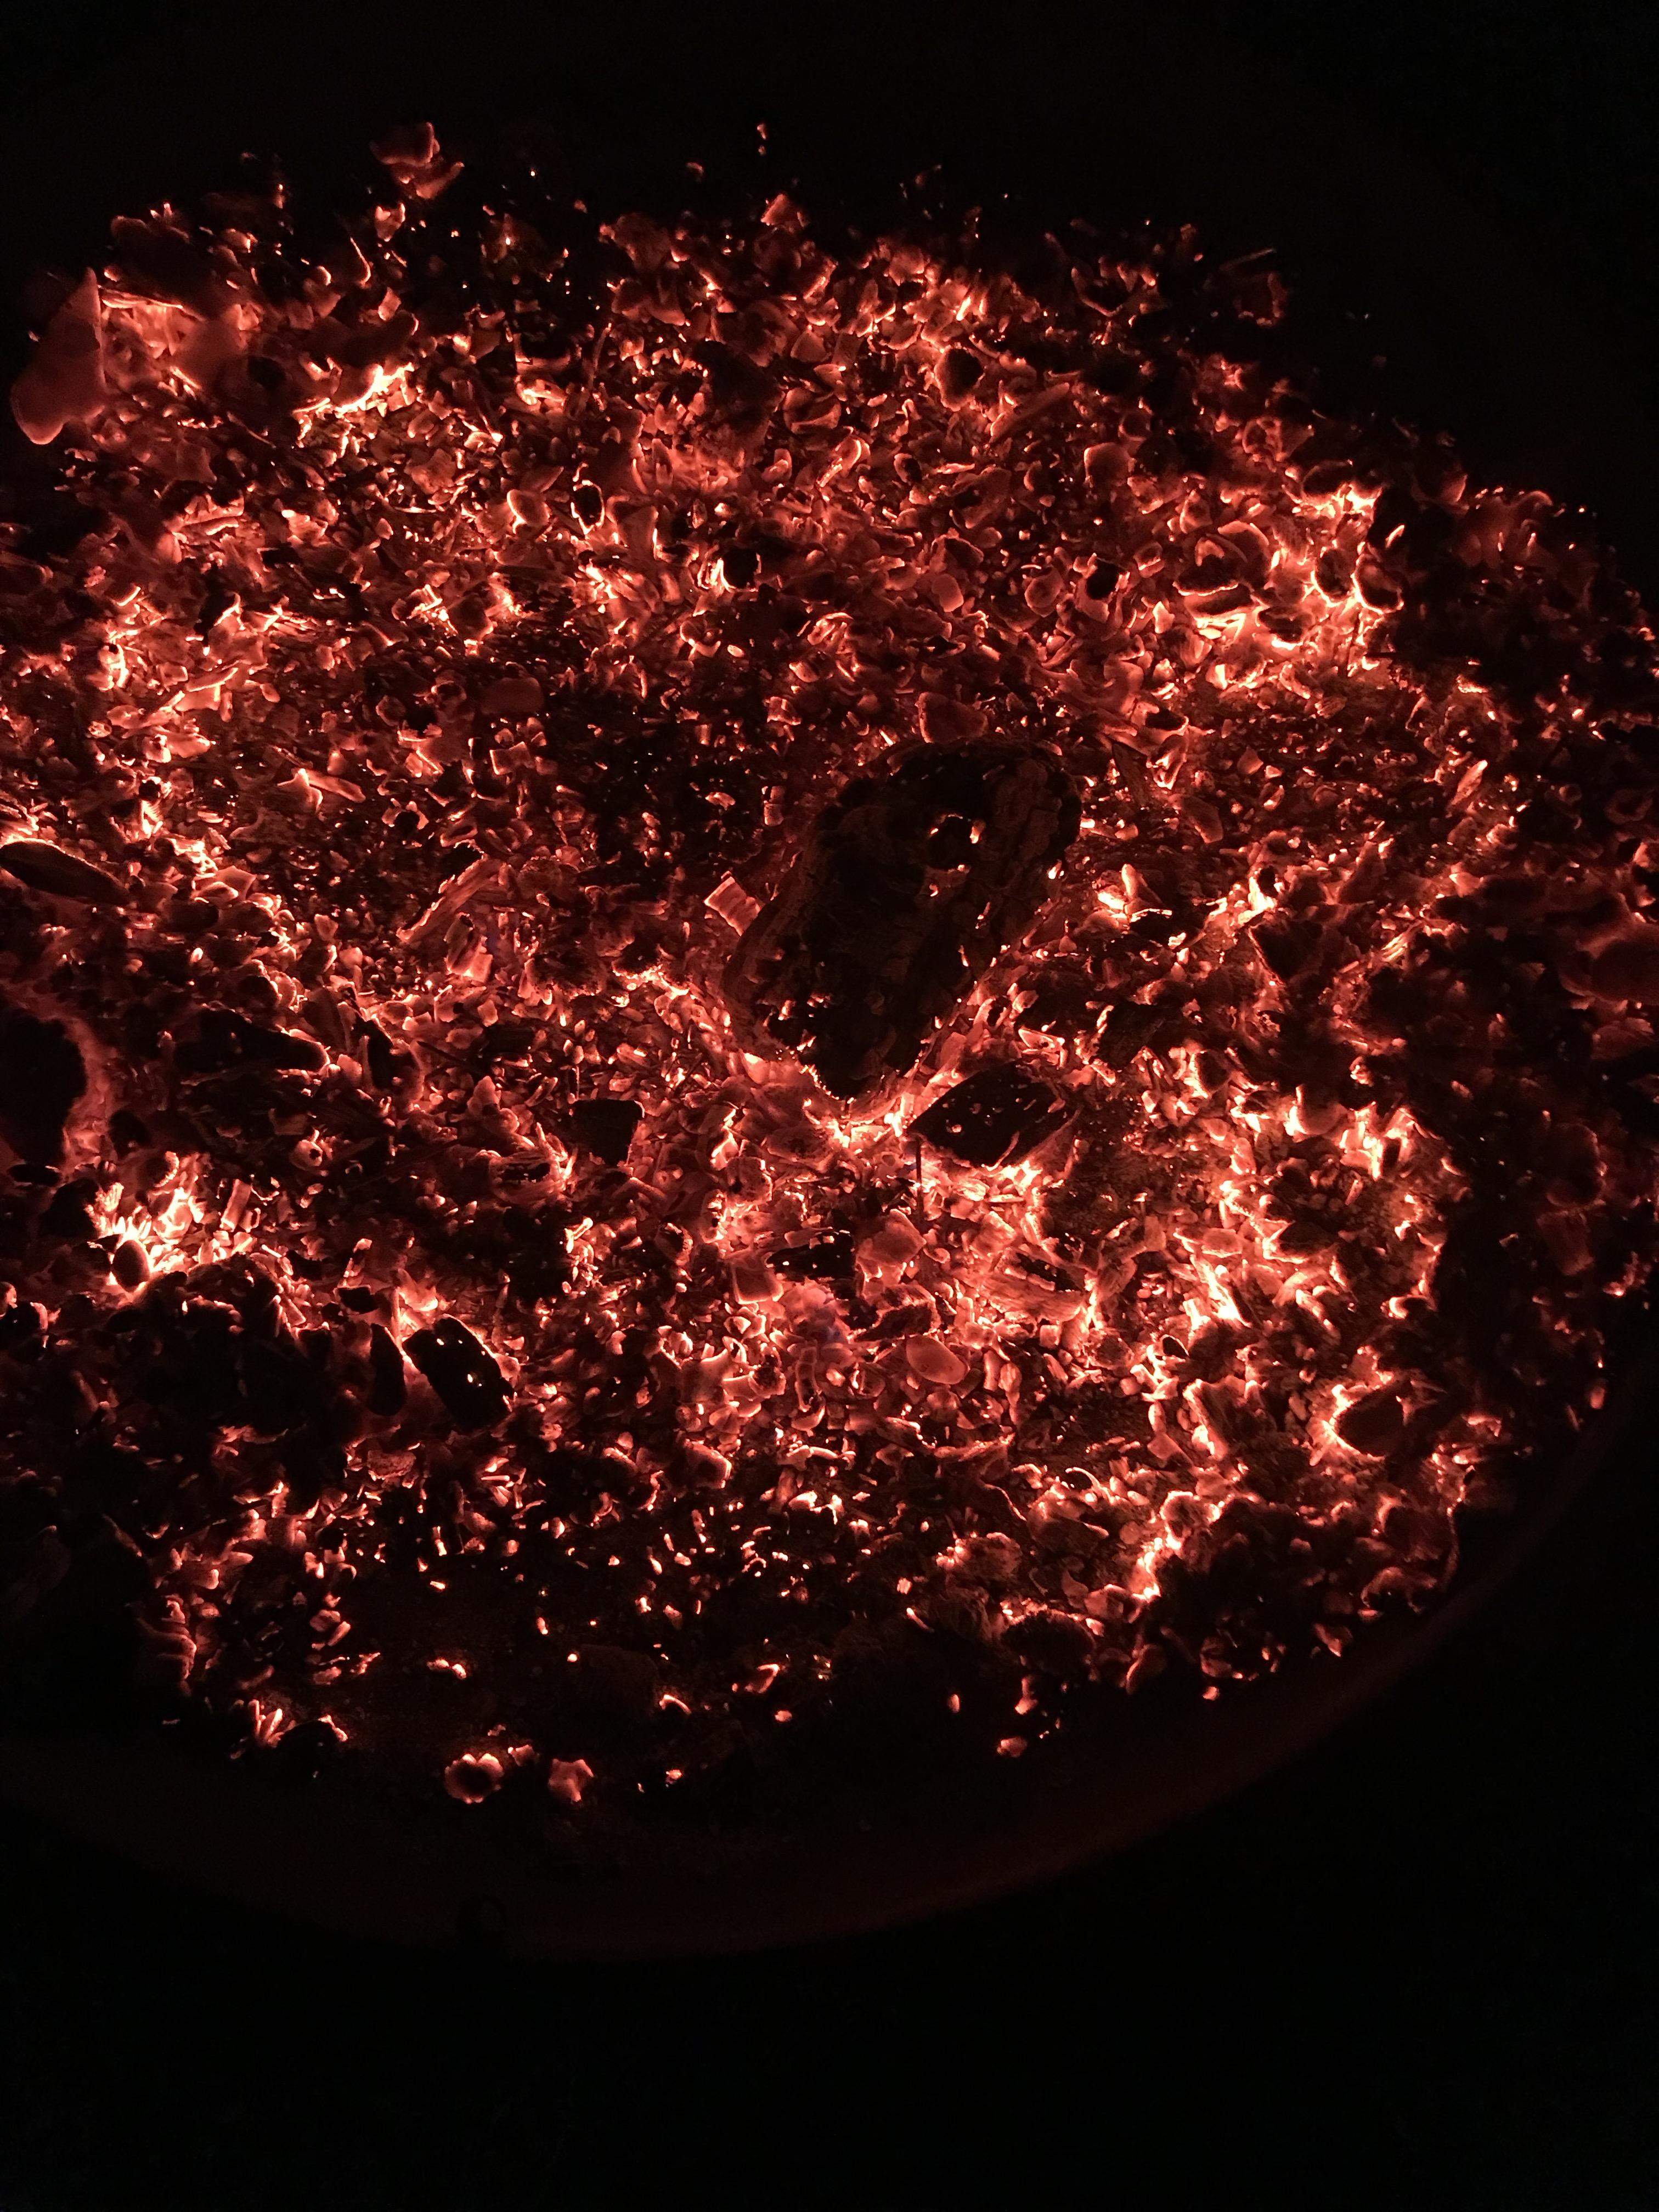 Embers from an expiring fire are fascinating